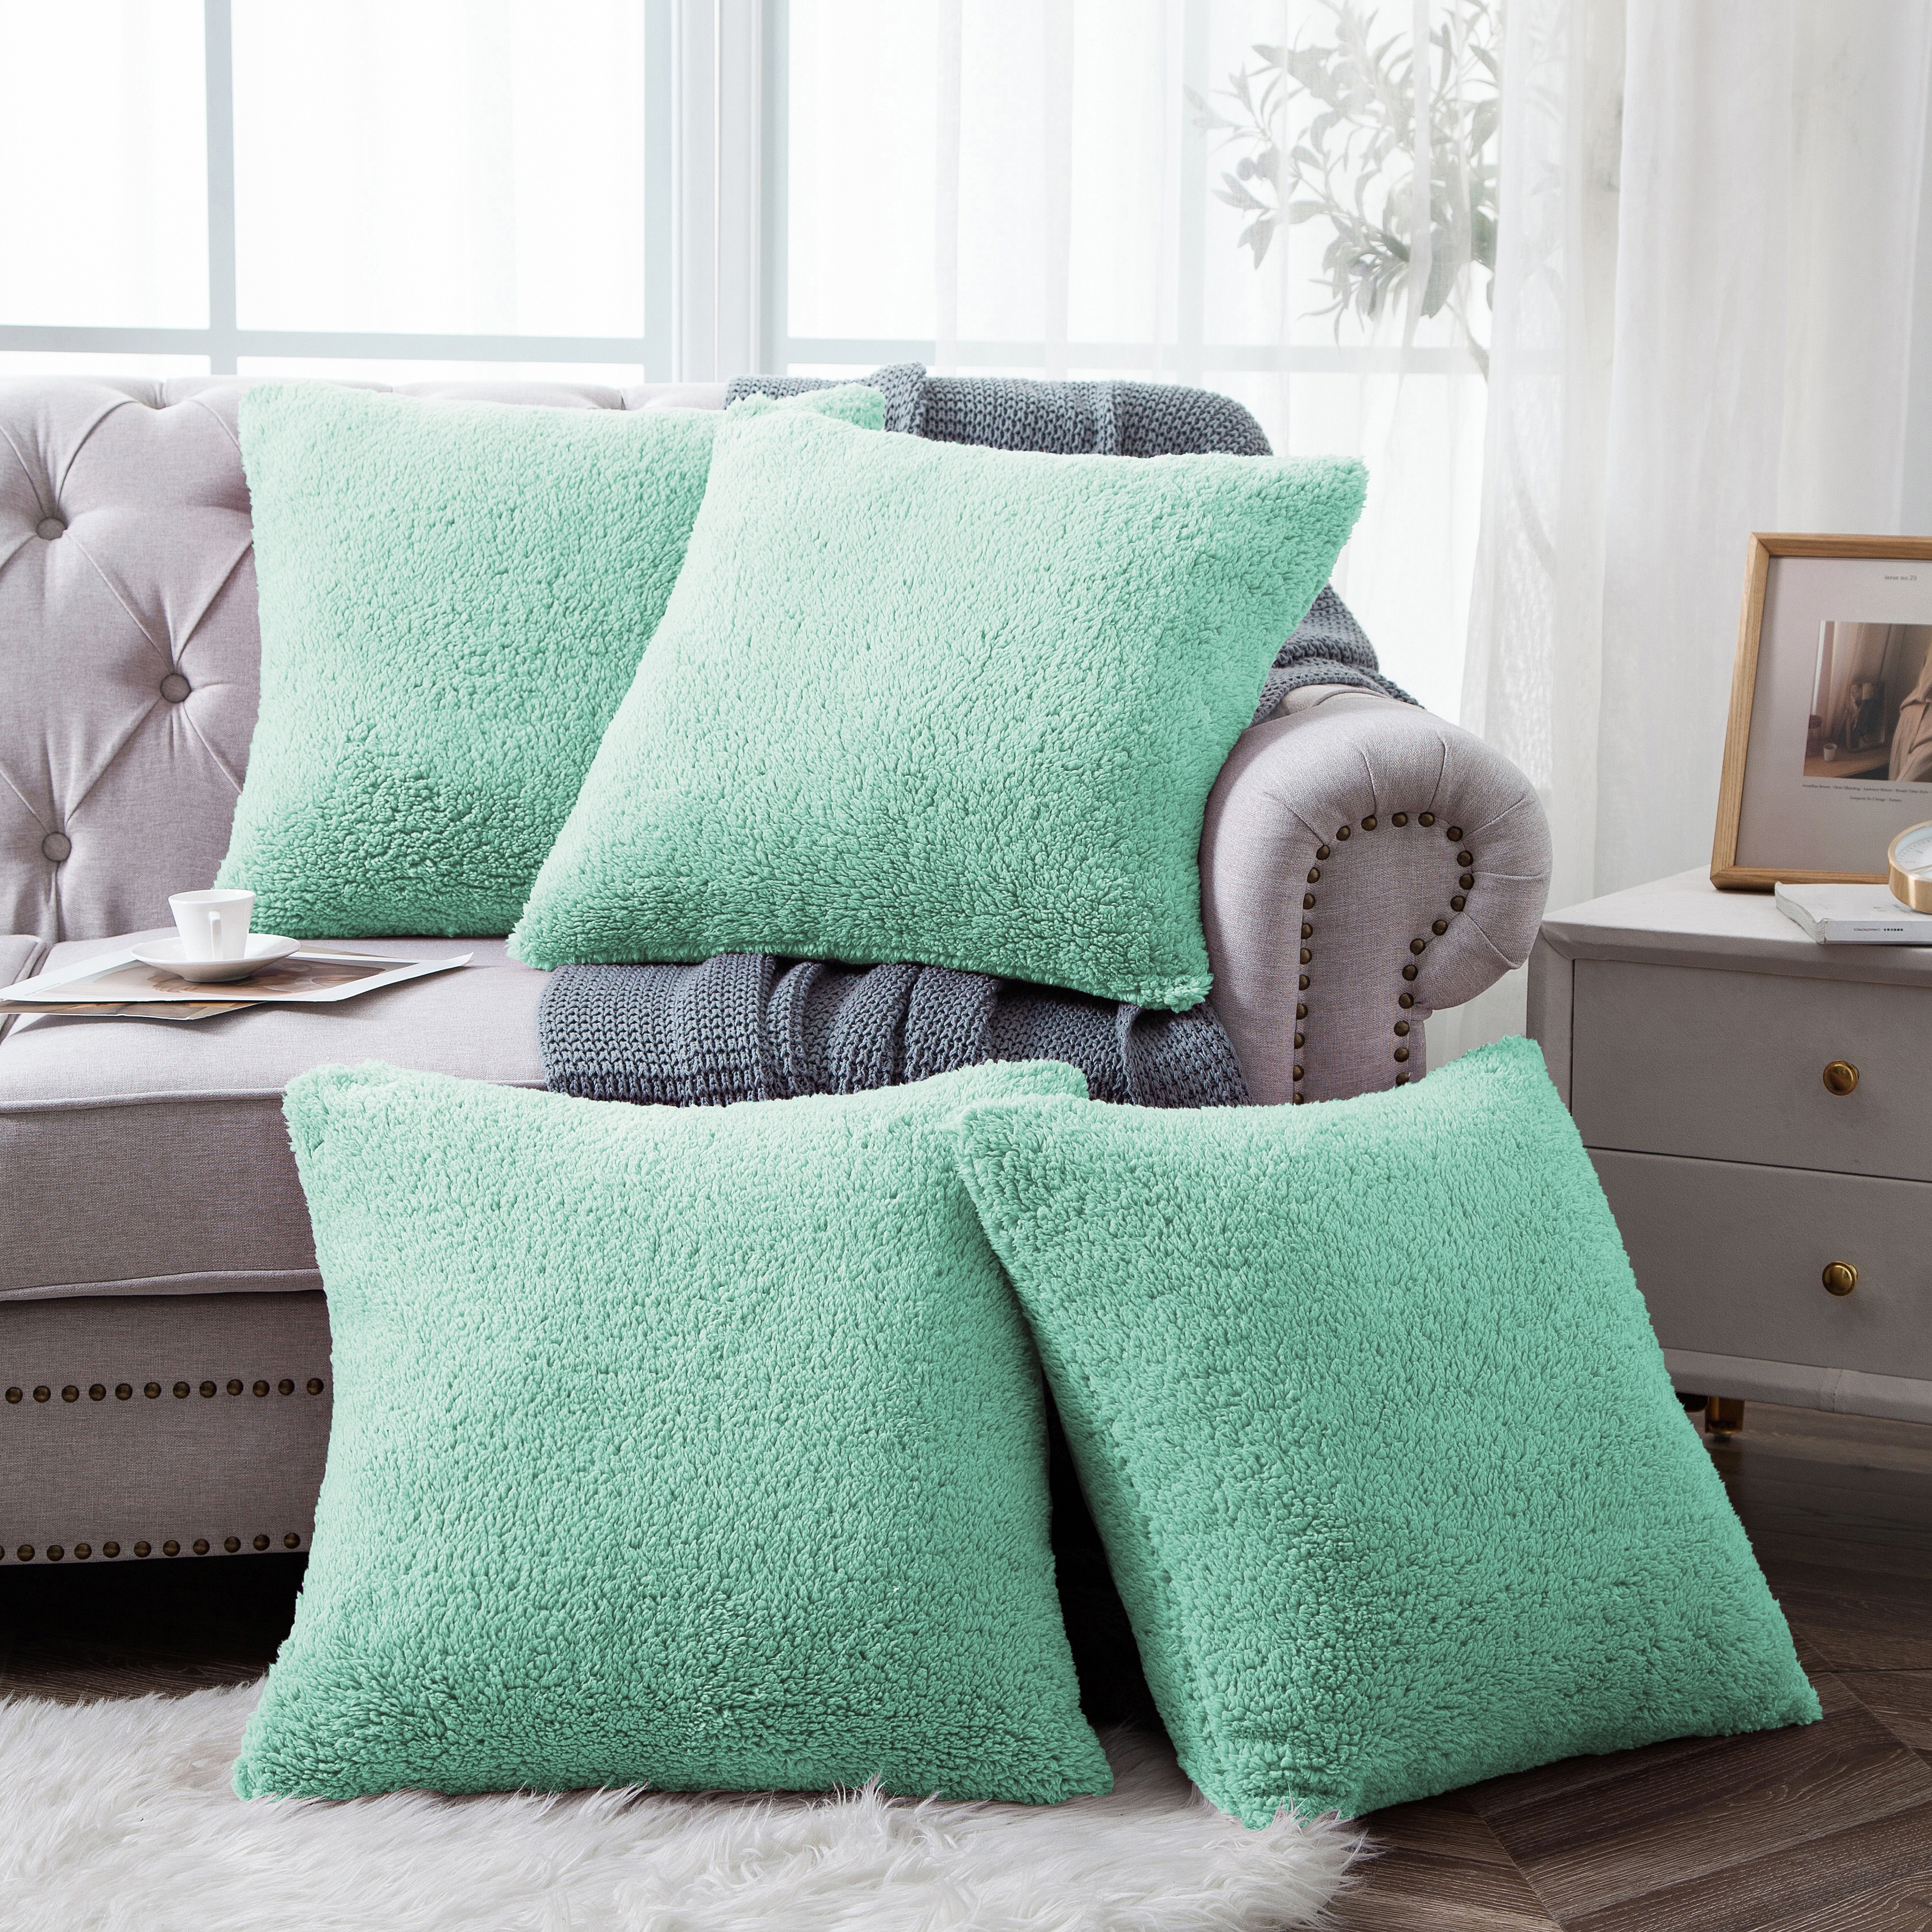 https://ak1.ostkcdn.com/images/products/is/images/direct/f546bf5819a240a0cb4dd8768139581a3ff8a190/Accent-Sherpa-Pillow-Cover-Set-of-4-20Inch-x-20Inch.jpg